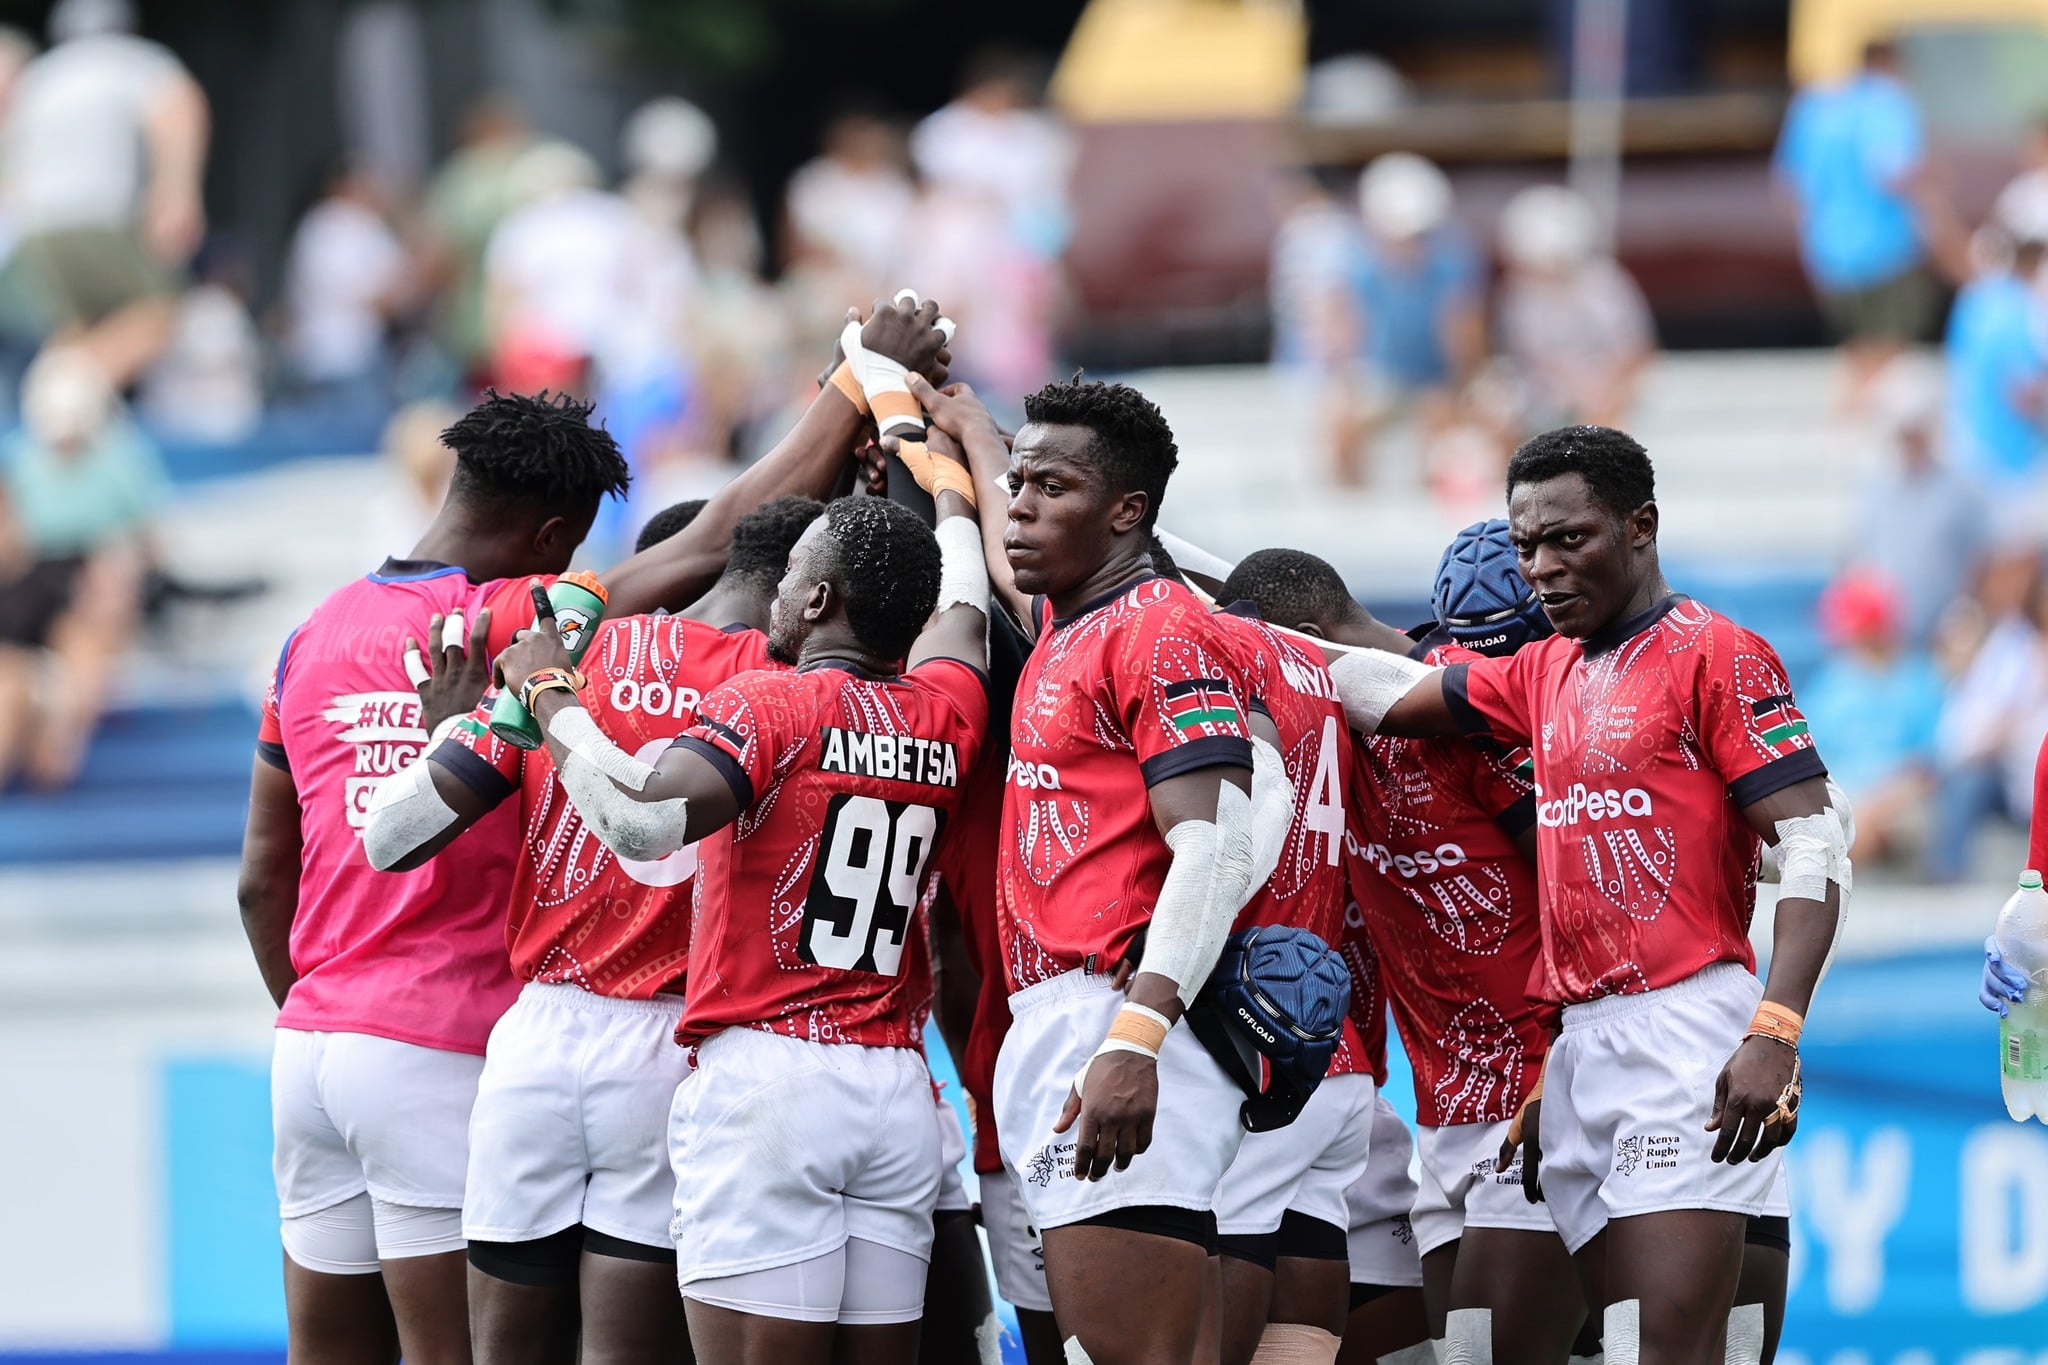 Kenya 7s advances to Challenger Series semifinals with narrow victory over Uganda